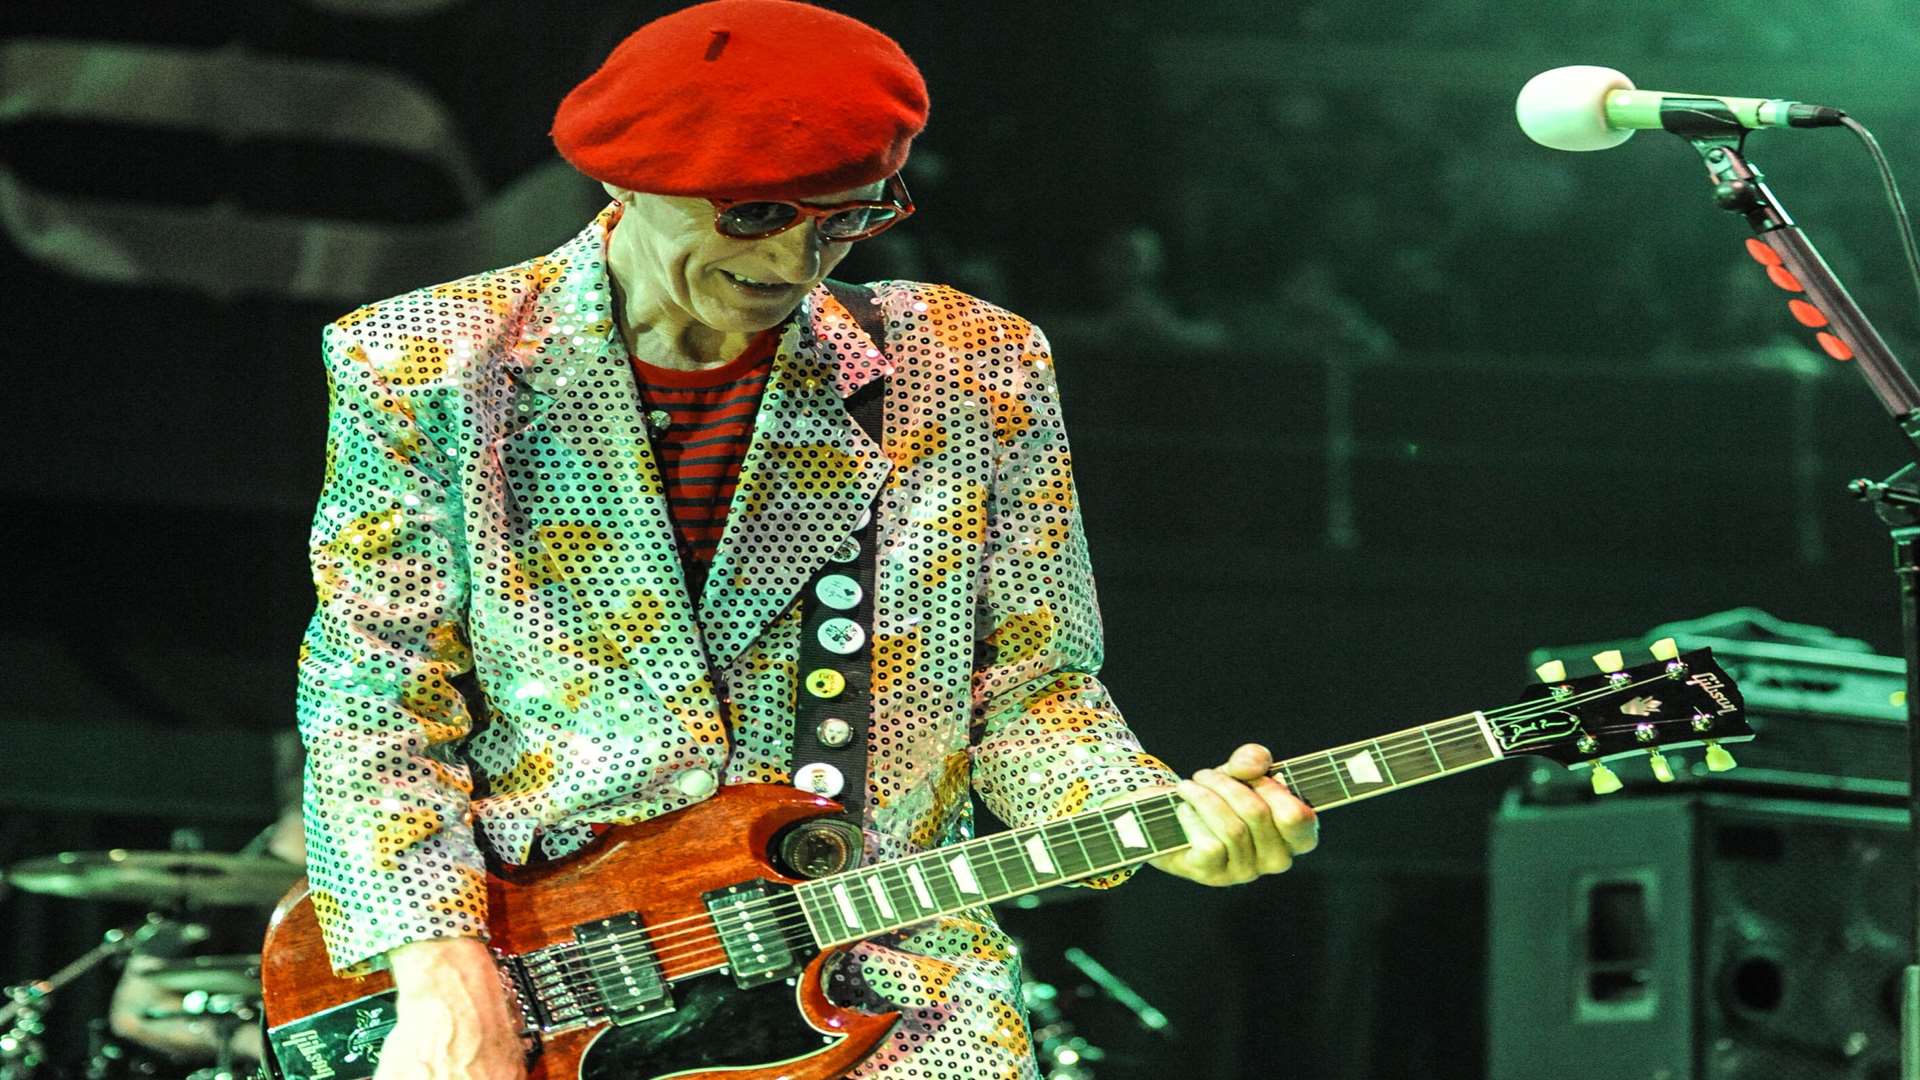 Captain Sensible of The Damned